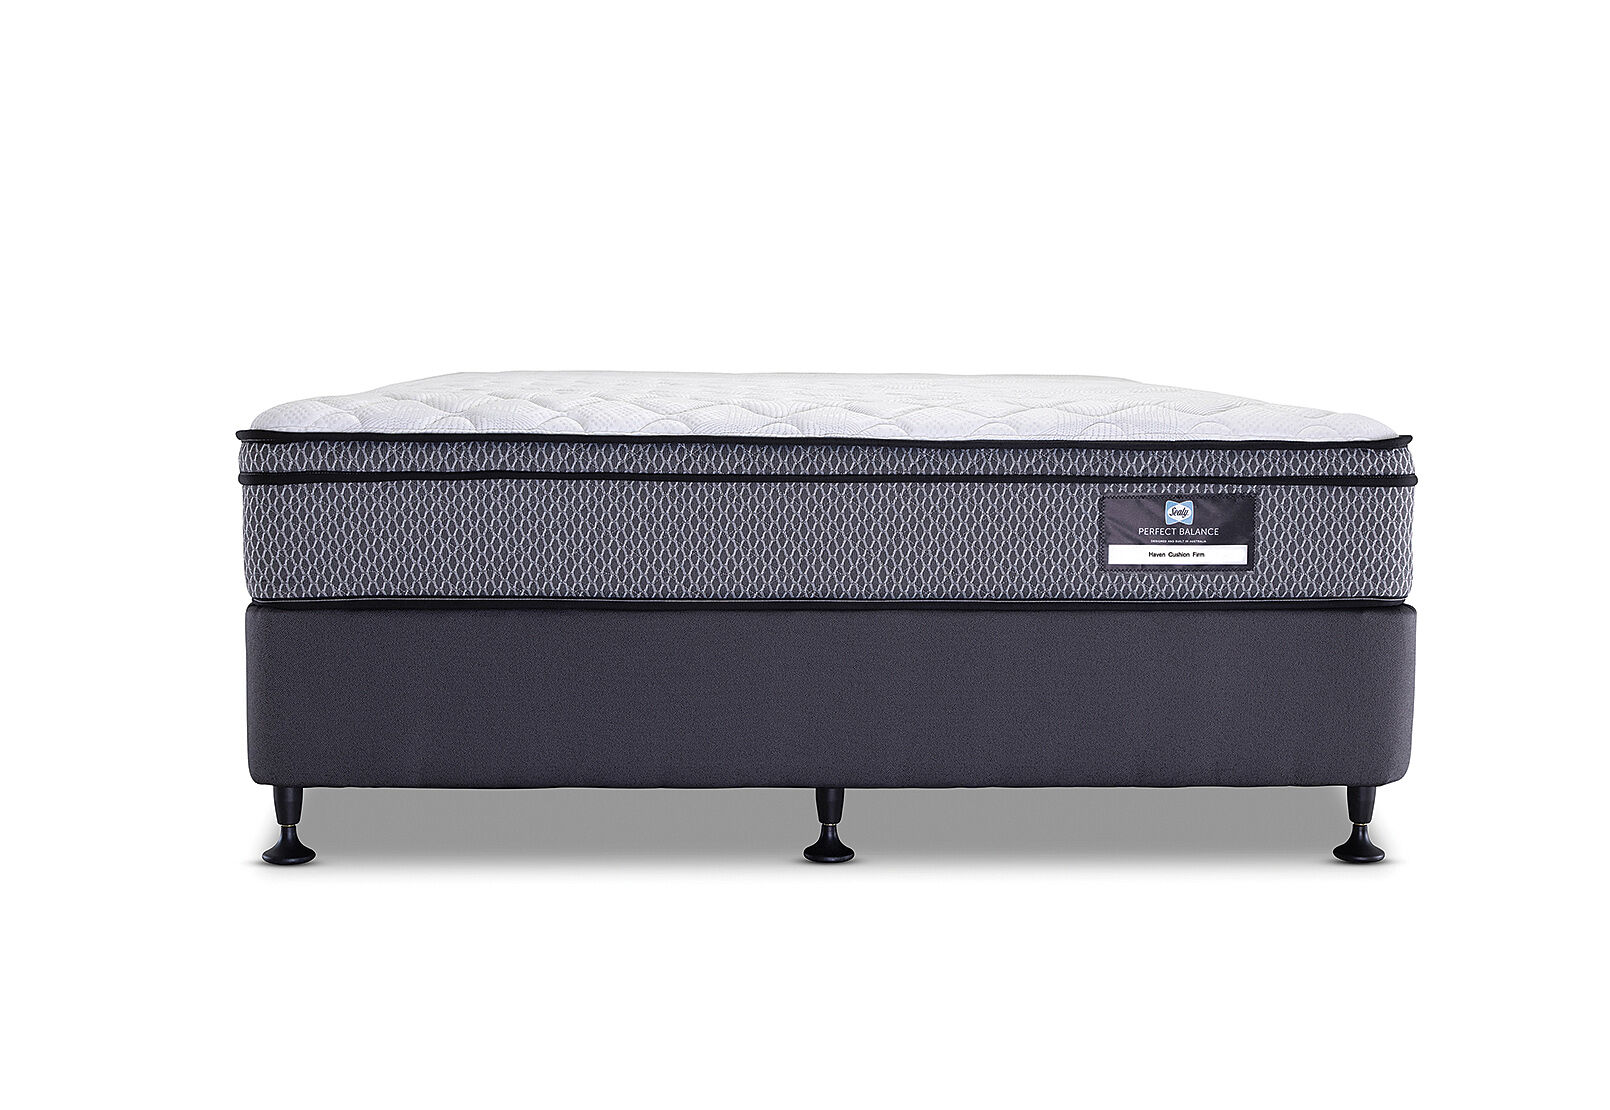 SEALY PERFECT BALANCE HAVEN CUSHION FIRM